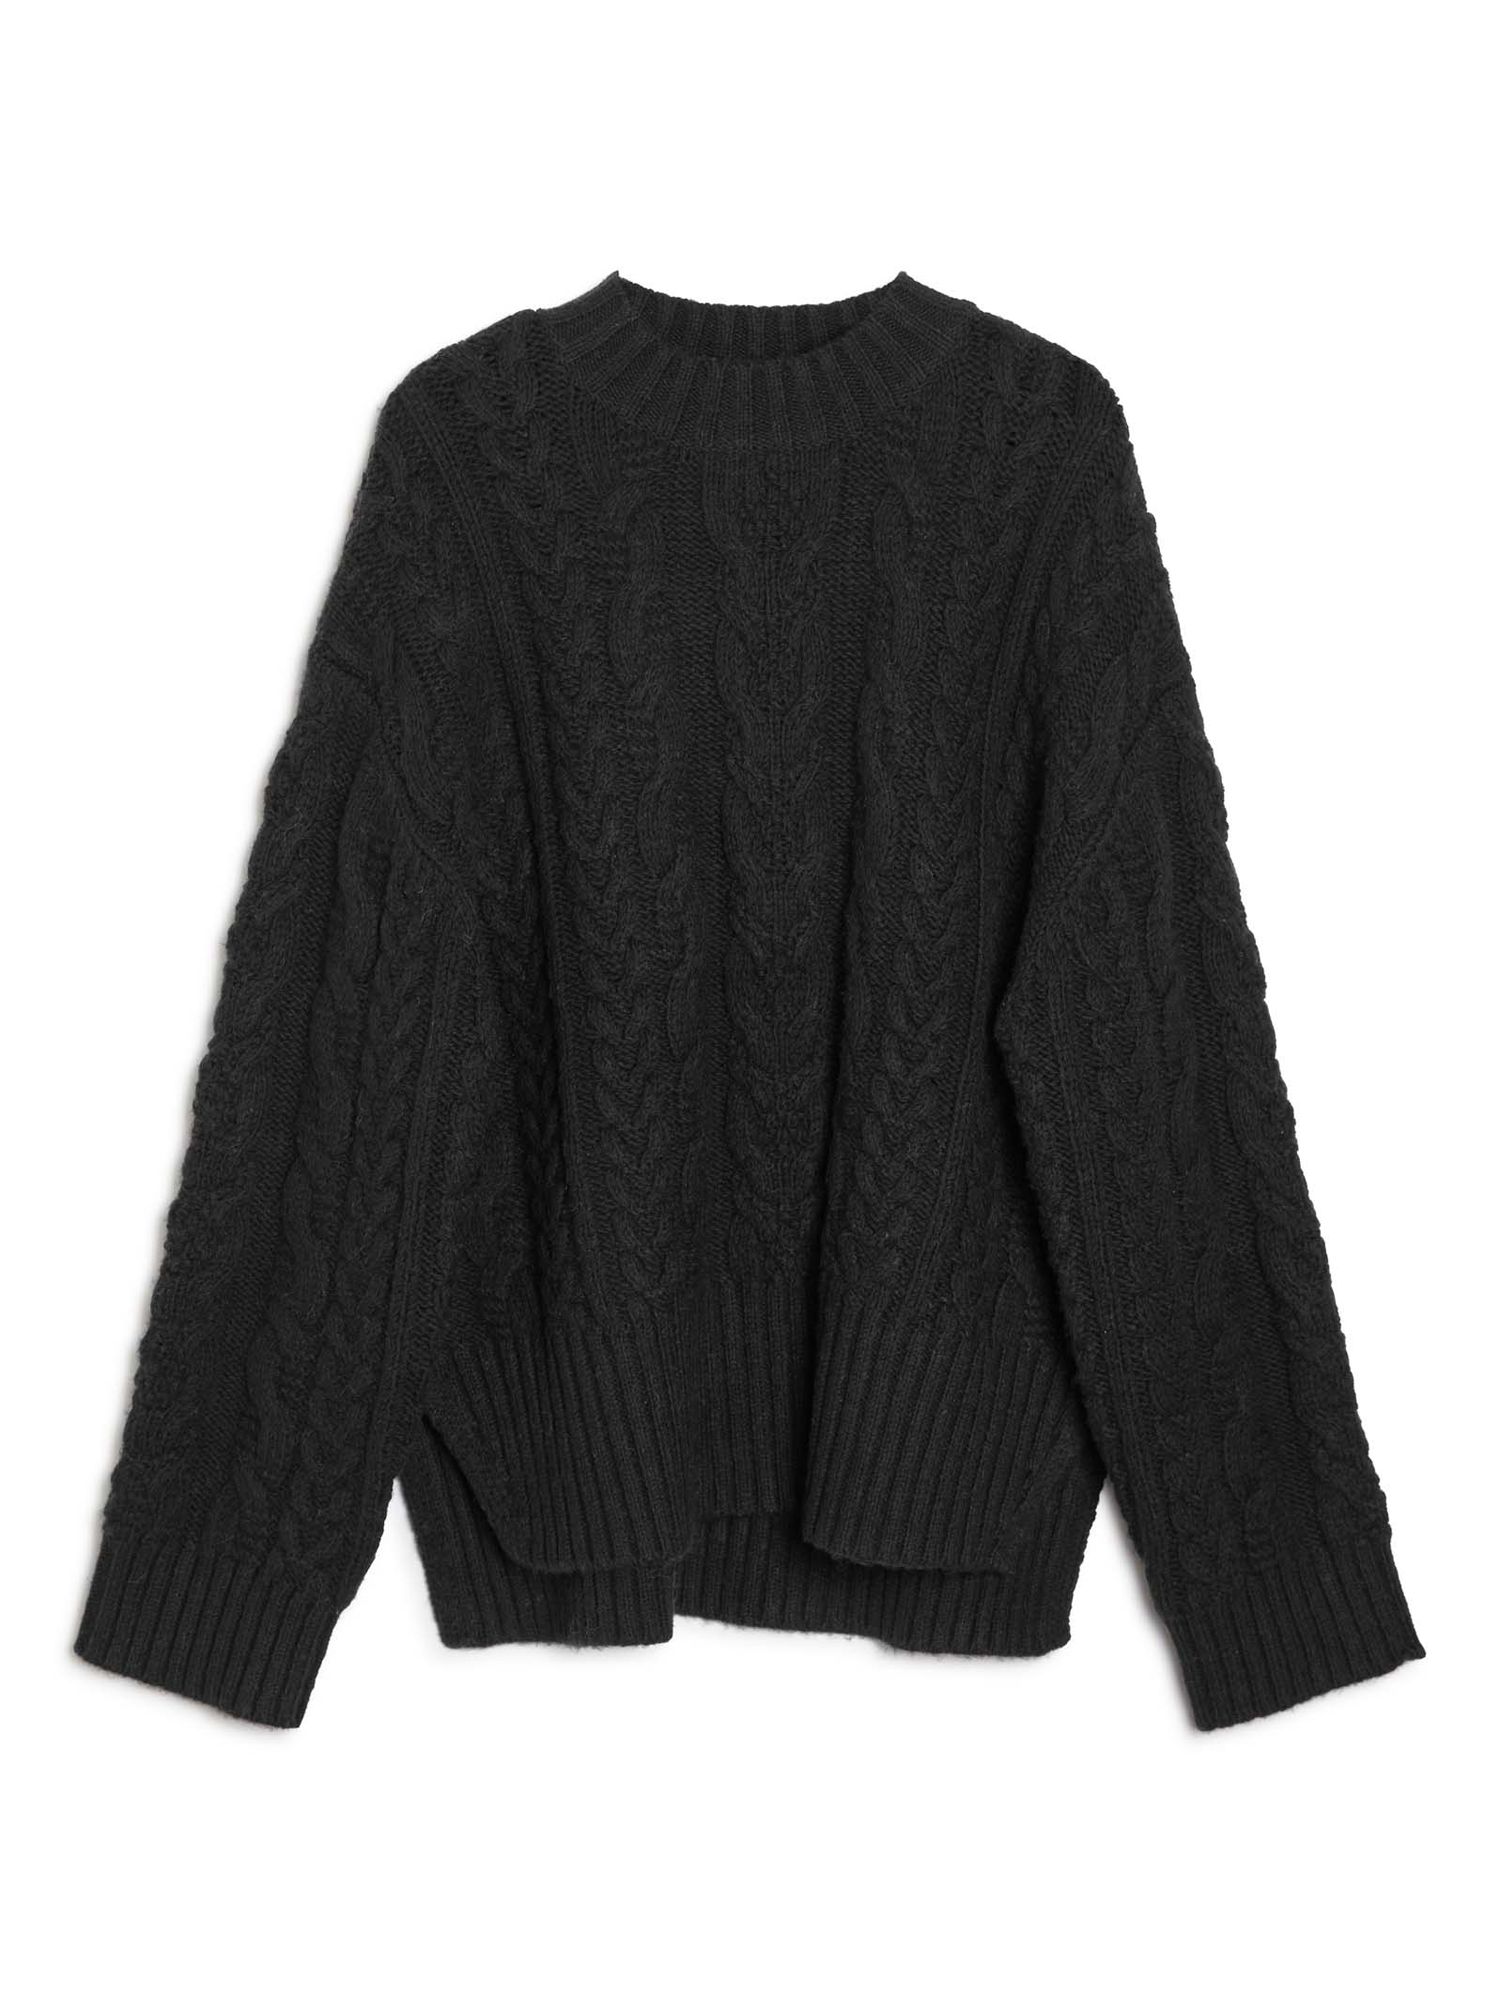 Albaray Cable Wool Blend Jumper, Black at John Lewis & Partners